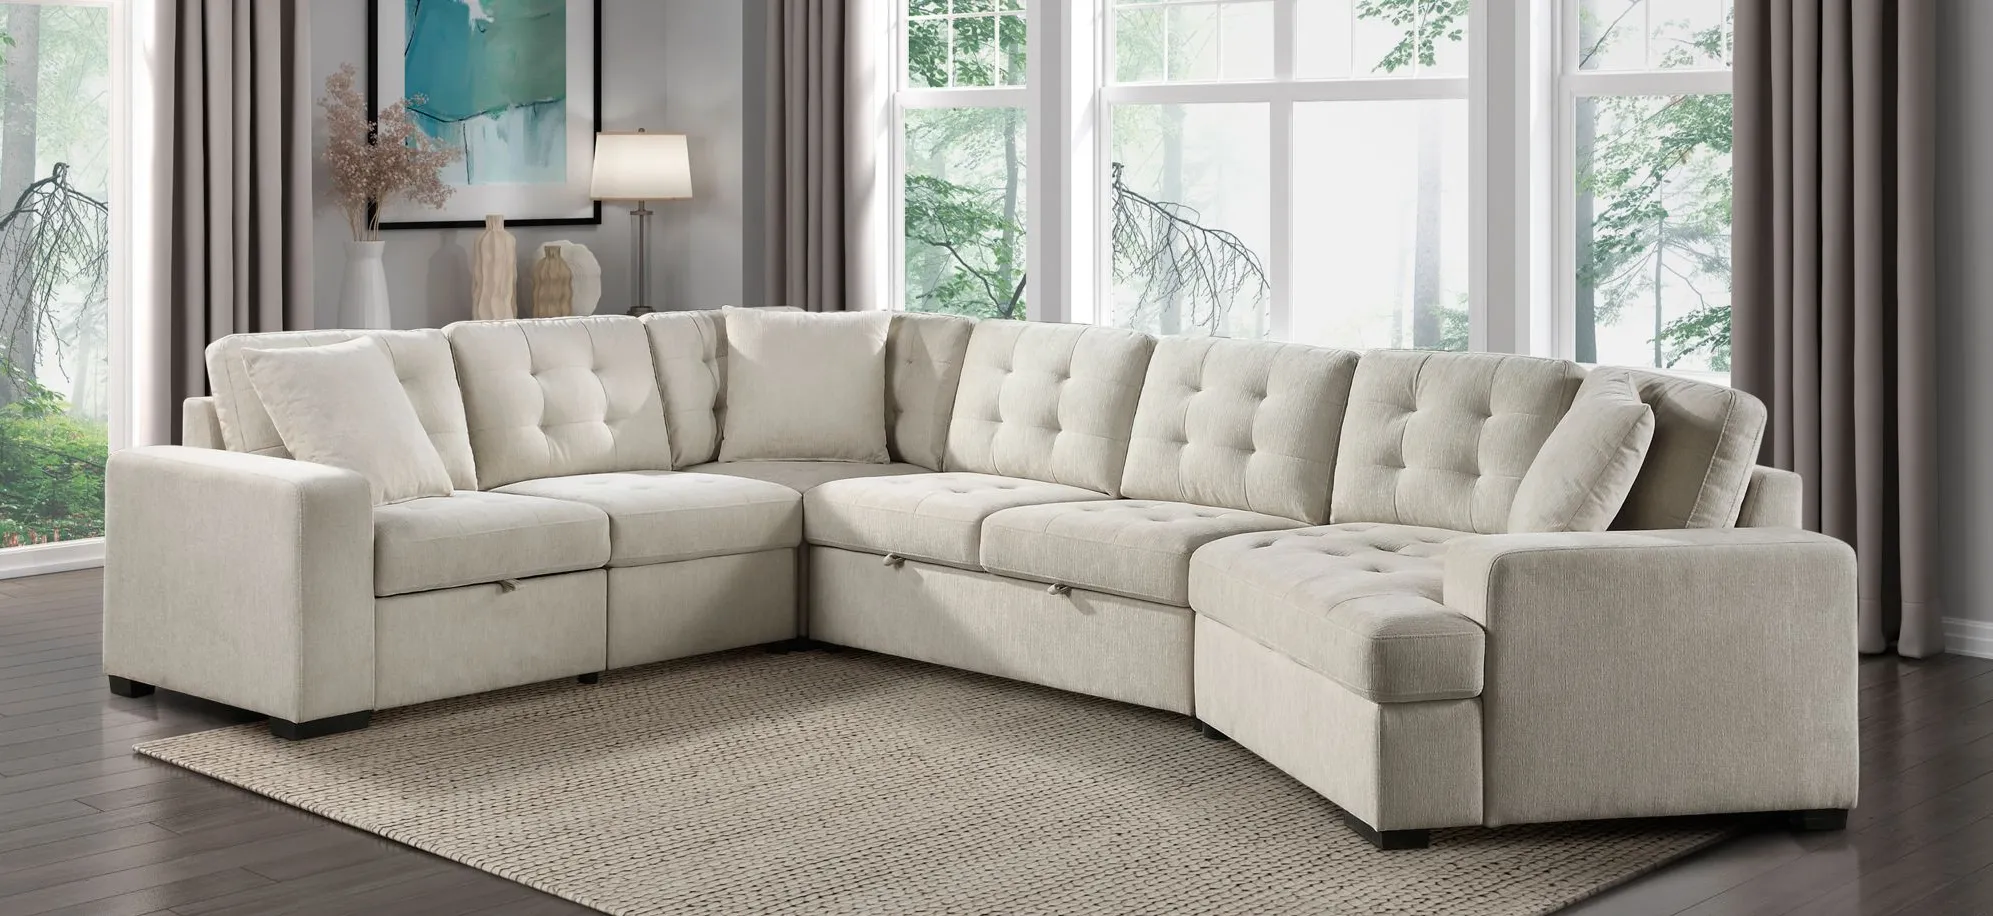 Aragon 4-pc. Sectional Sofa in Beige by Homelegance